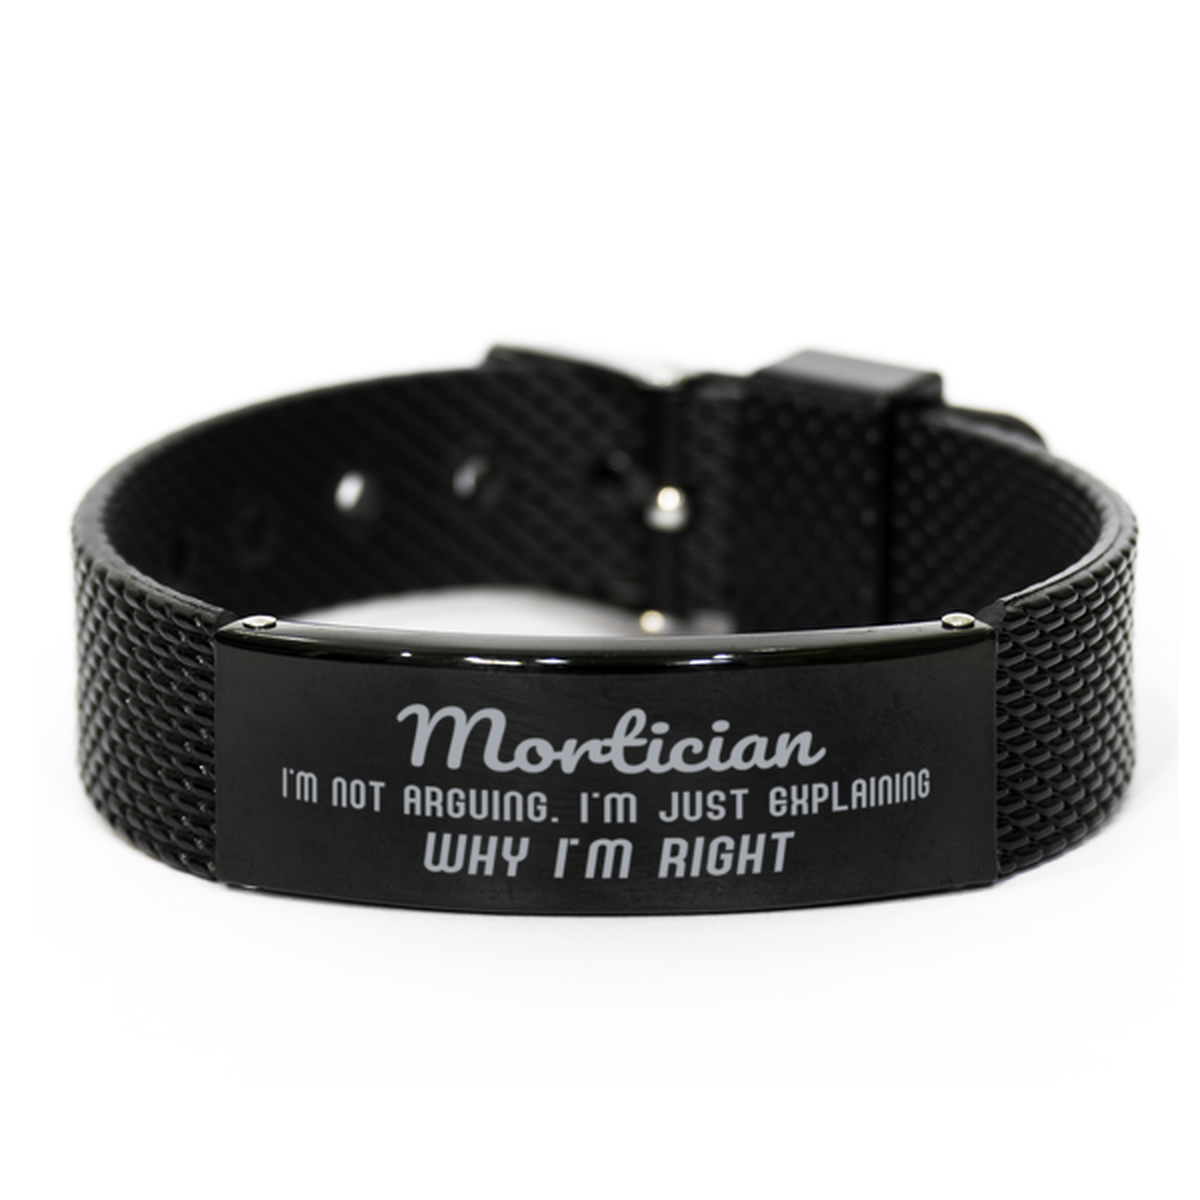 Mortician I'm not Arguing. I'm Just Explaining Why I'm RIGHT Black Shark Mesh Bracelet, Funny Saying Quote Mortician Gifts For Mortician Graduation Birthday Christmas Gifts for Men Women Coworker